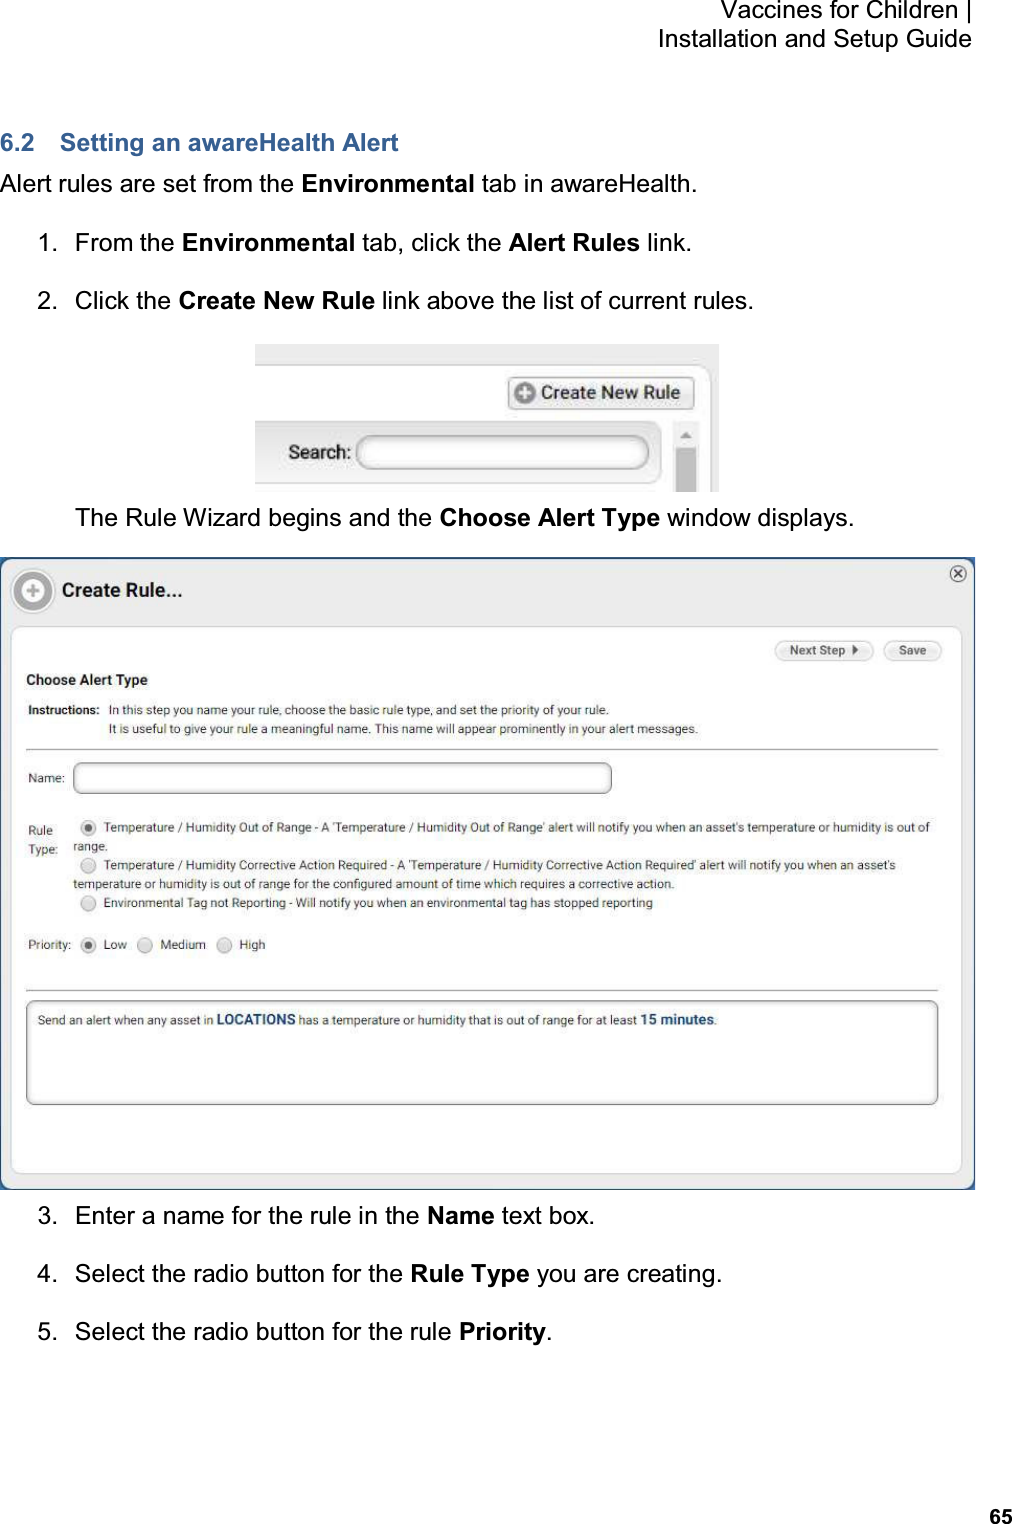           65 Vaccines for Children |  Installation and Setup Guide 6.2  Setting an awareHealth Alert Alert rules are set from the Environmental tab in awareHealth. 1.  From the Environmental tab, click the Alert Rules link. 2.  Click the Create New Rule link above the list of current rules.  The Rule Wizard begins and the Choose Alert Type window displays.  3.  Enter a name for the rule in the Name text box. 4.  Select the radio button for the Rule Type you are creating. 5.  Select the radio button for the rule Priority. 